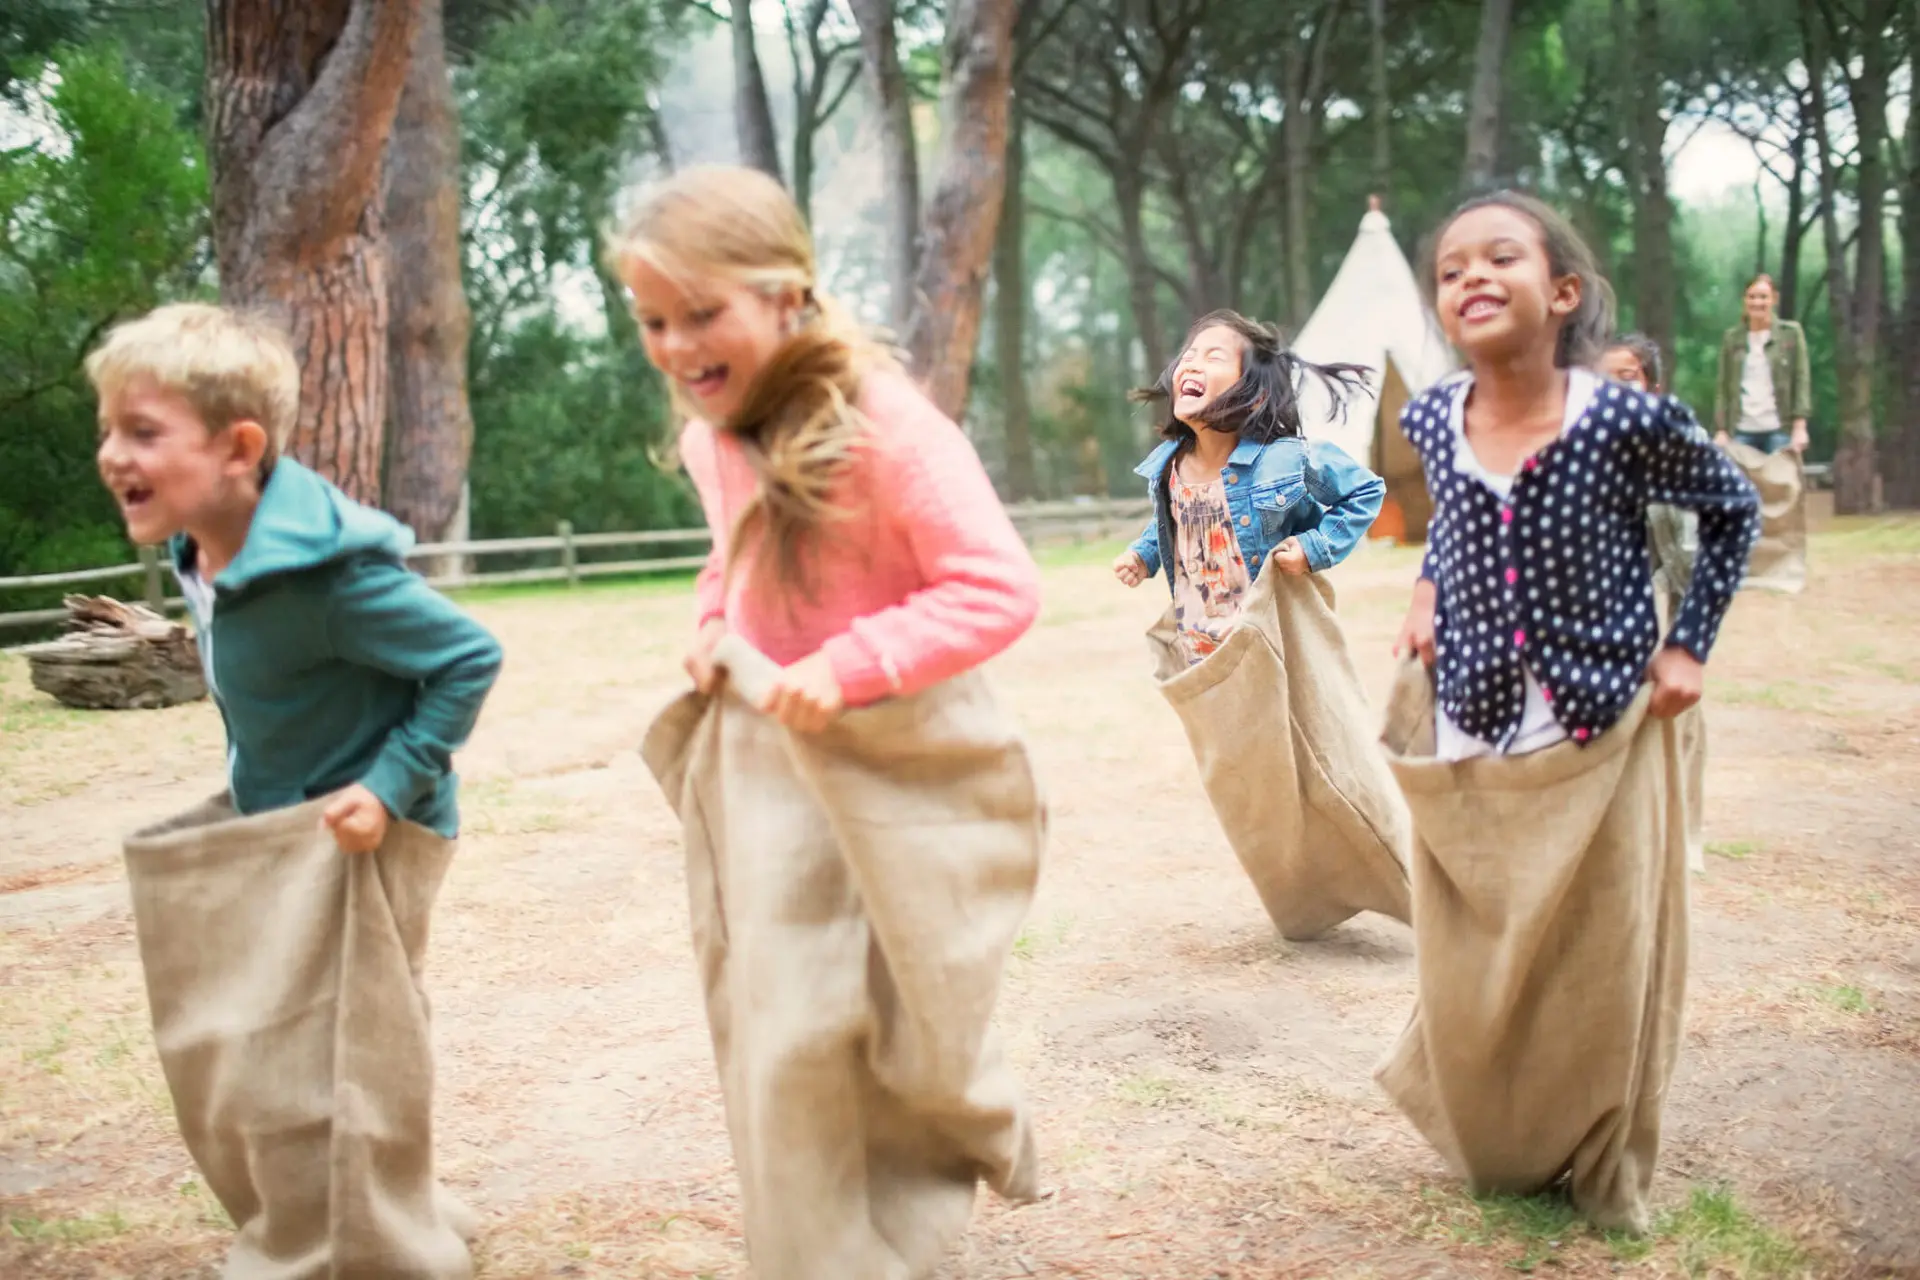 Four children in potato sacks racing. The children are laughing while they are jumping in the sacks.